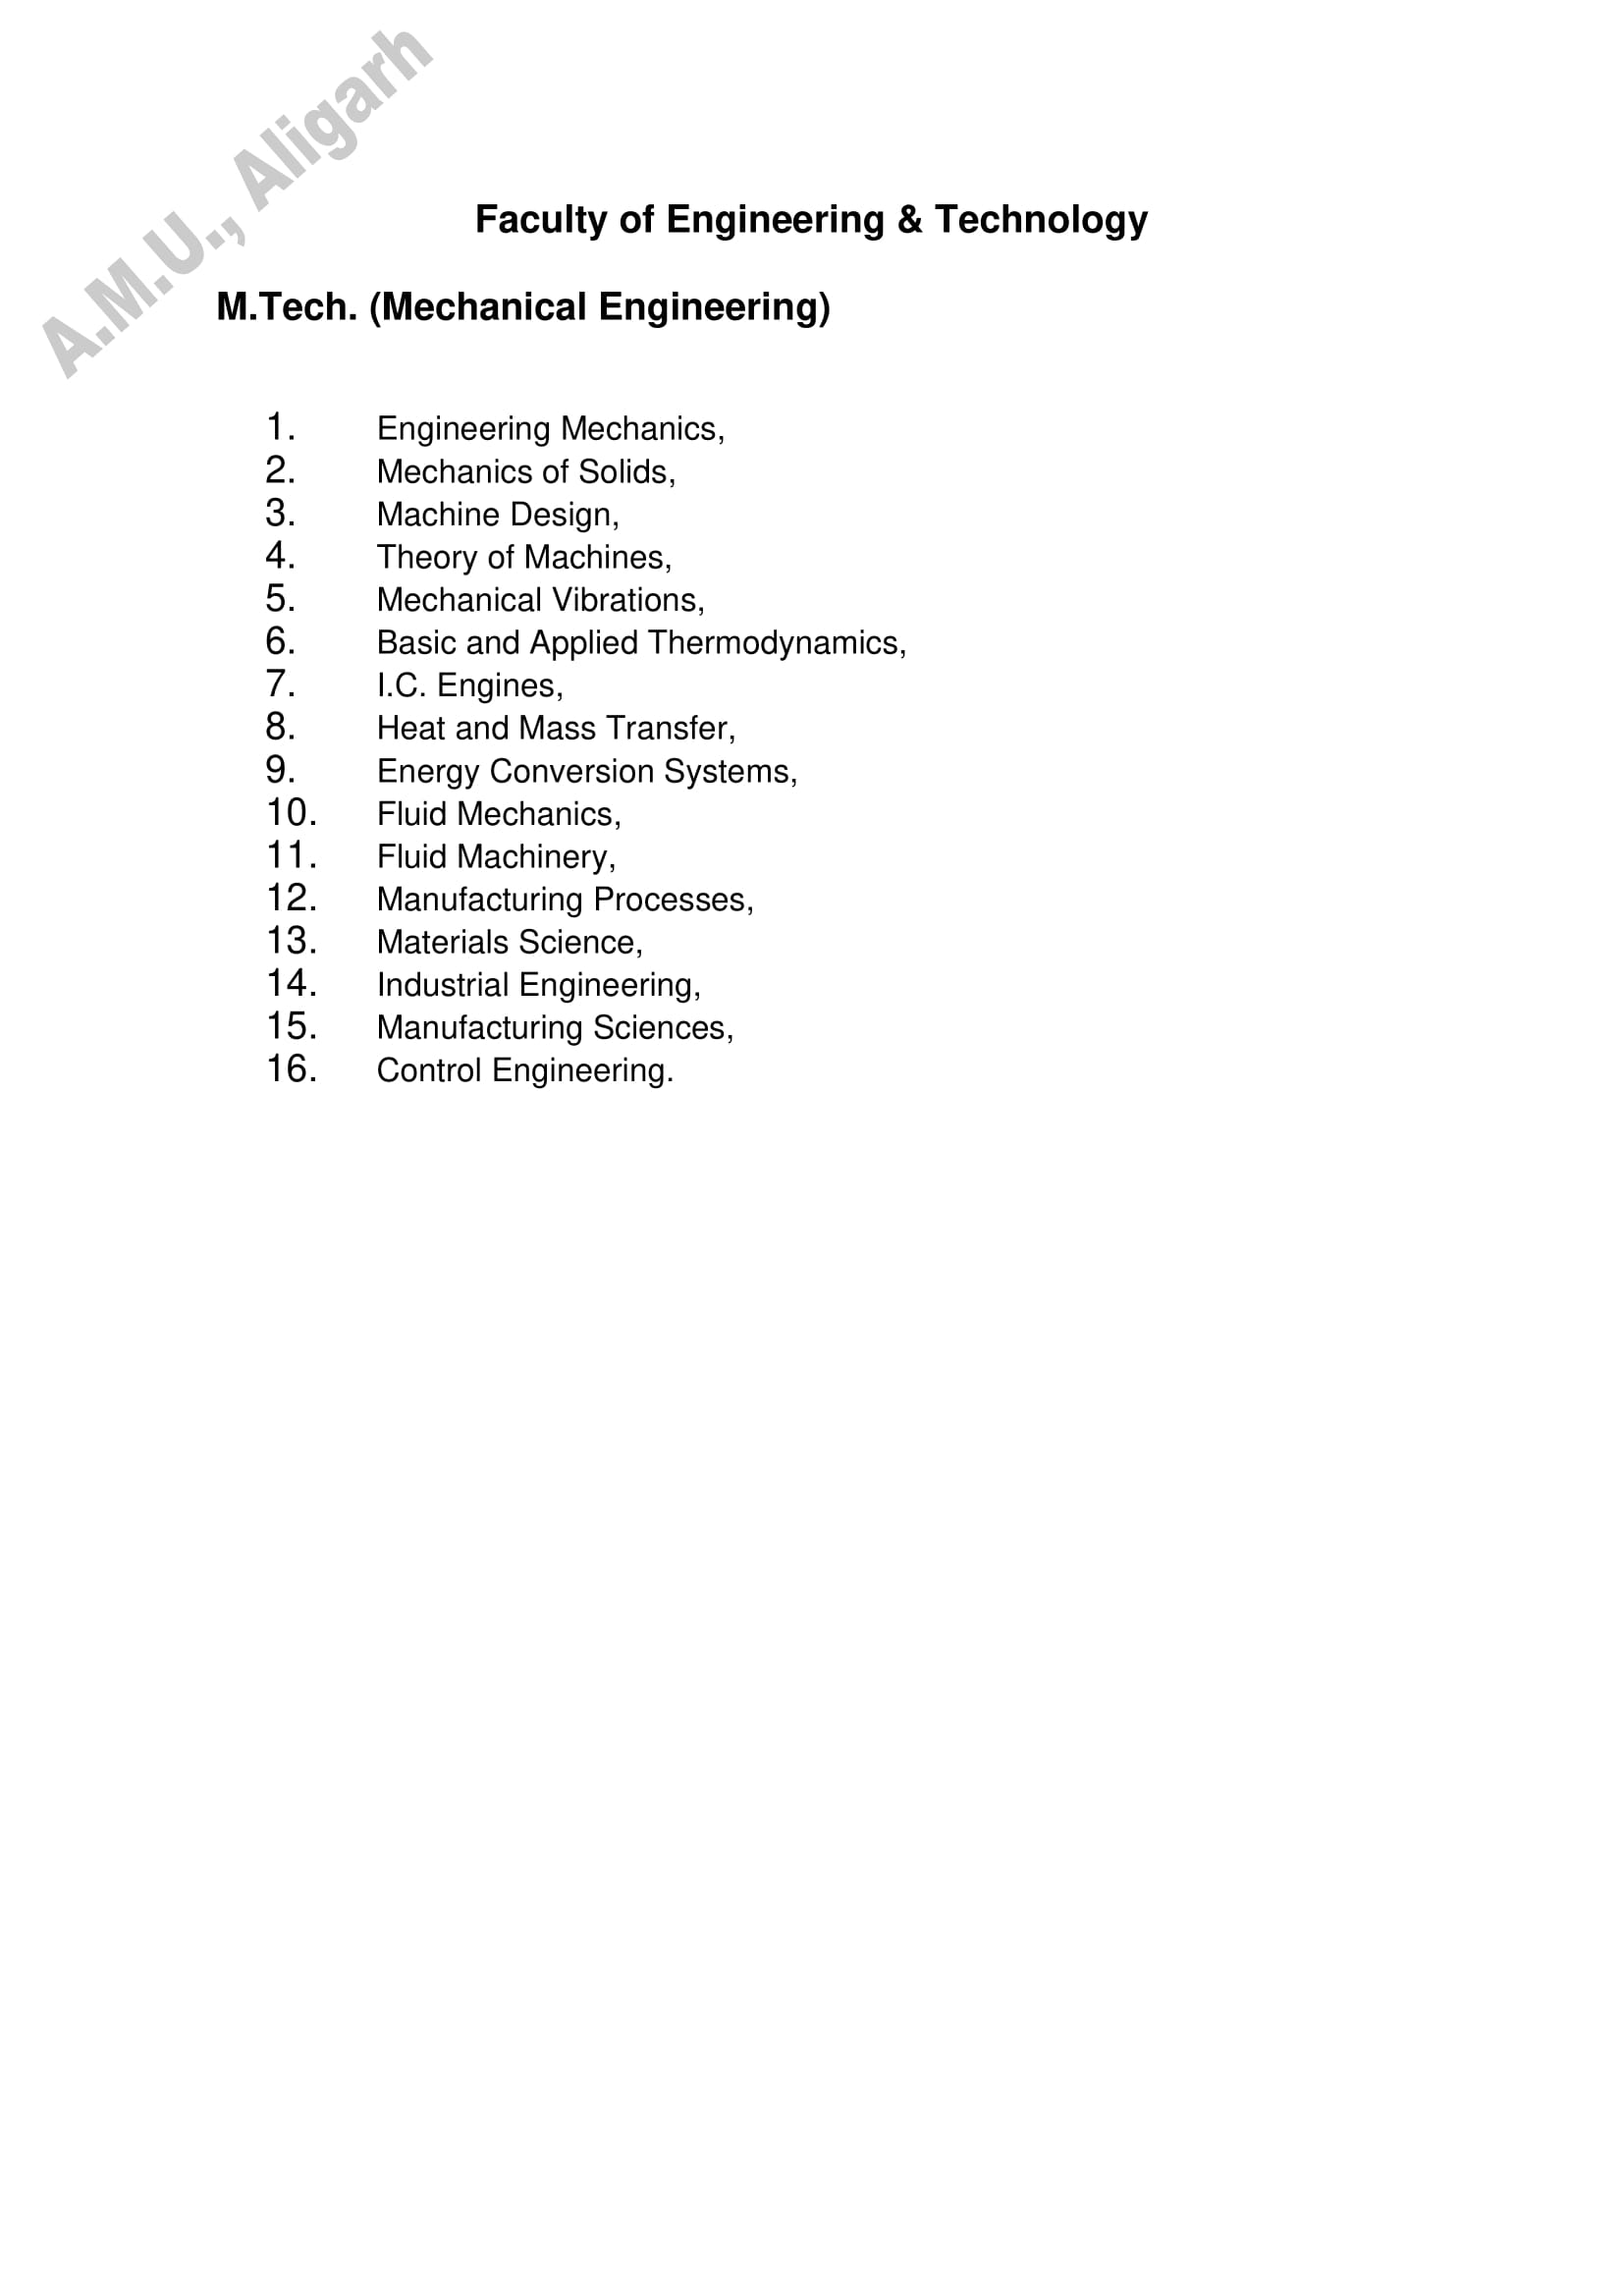 AMU Entrance Exam Syllabus for M.Tech in Mechanical Engineering - Page 1